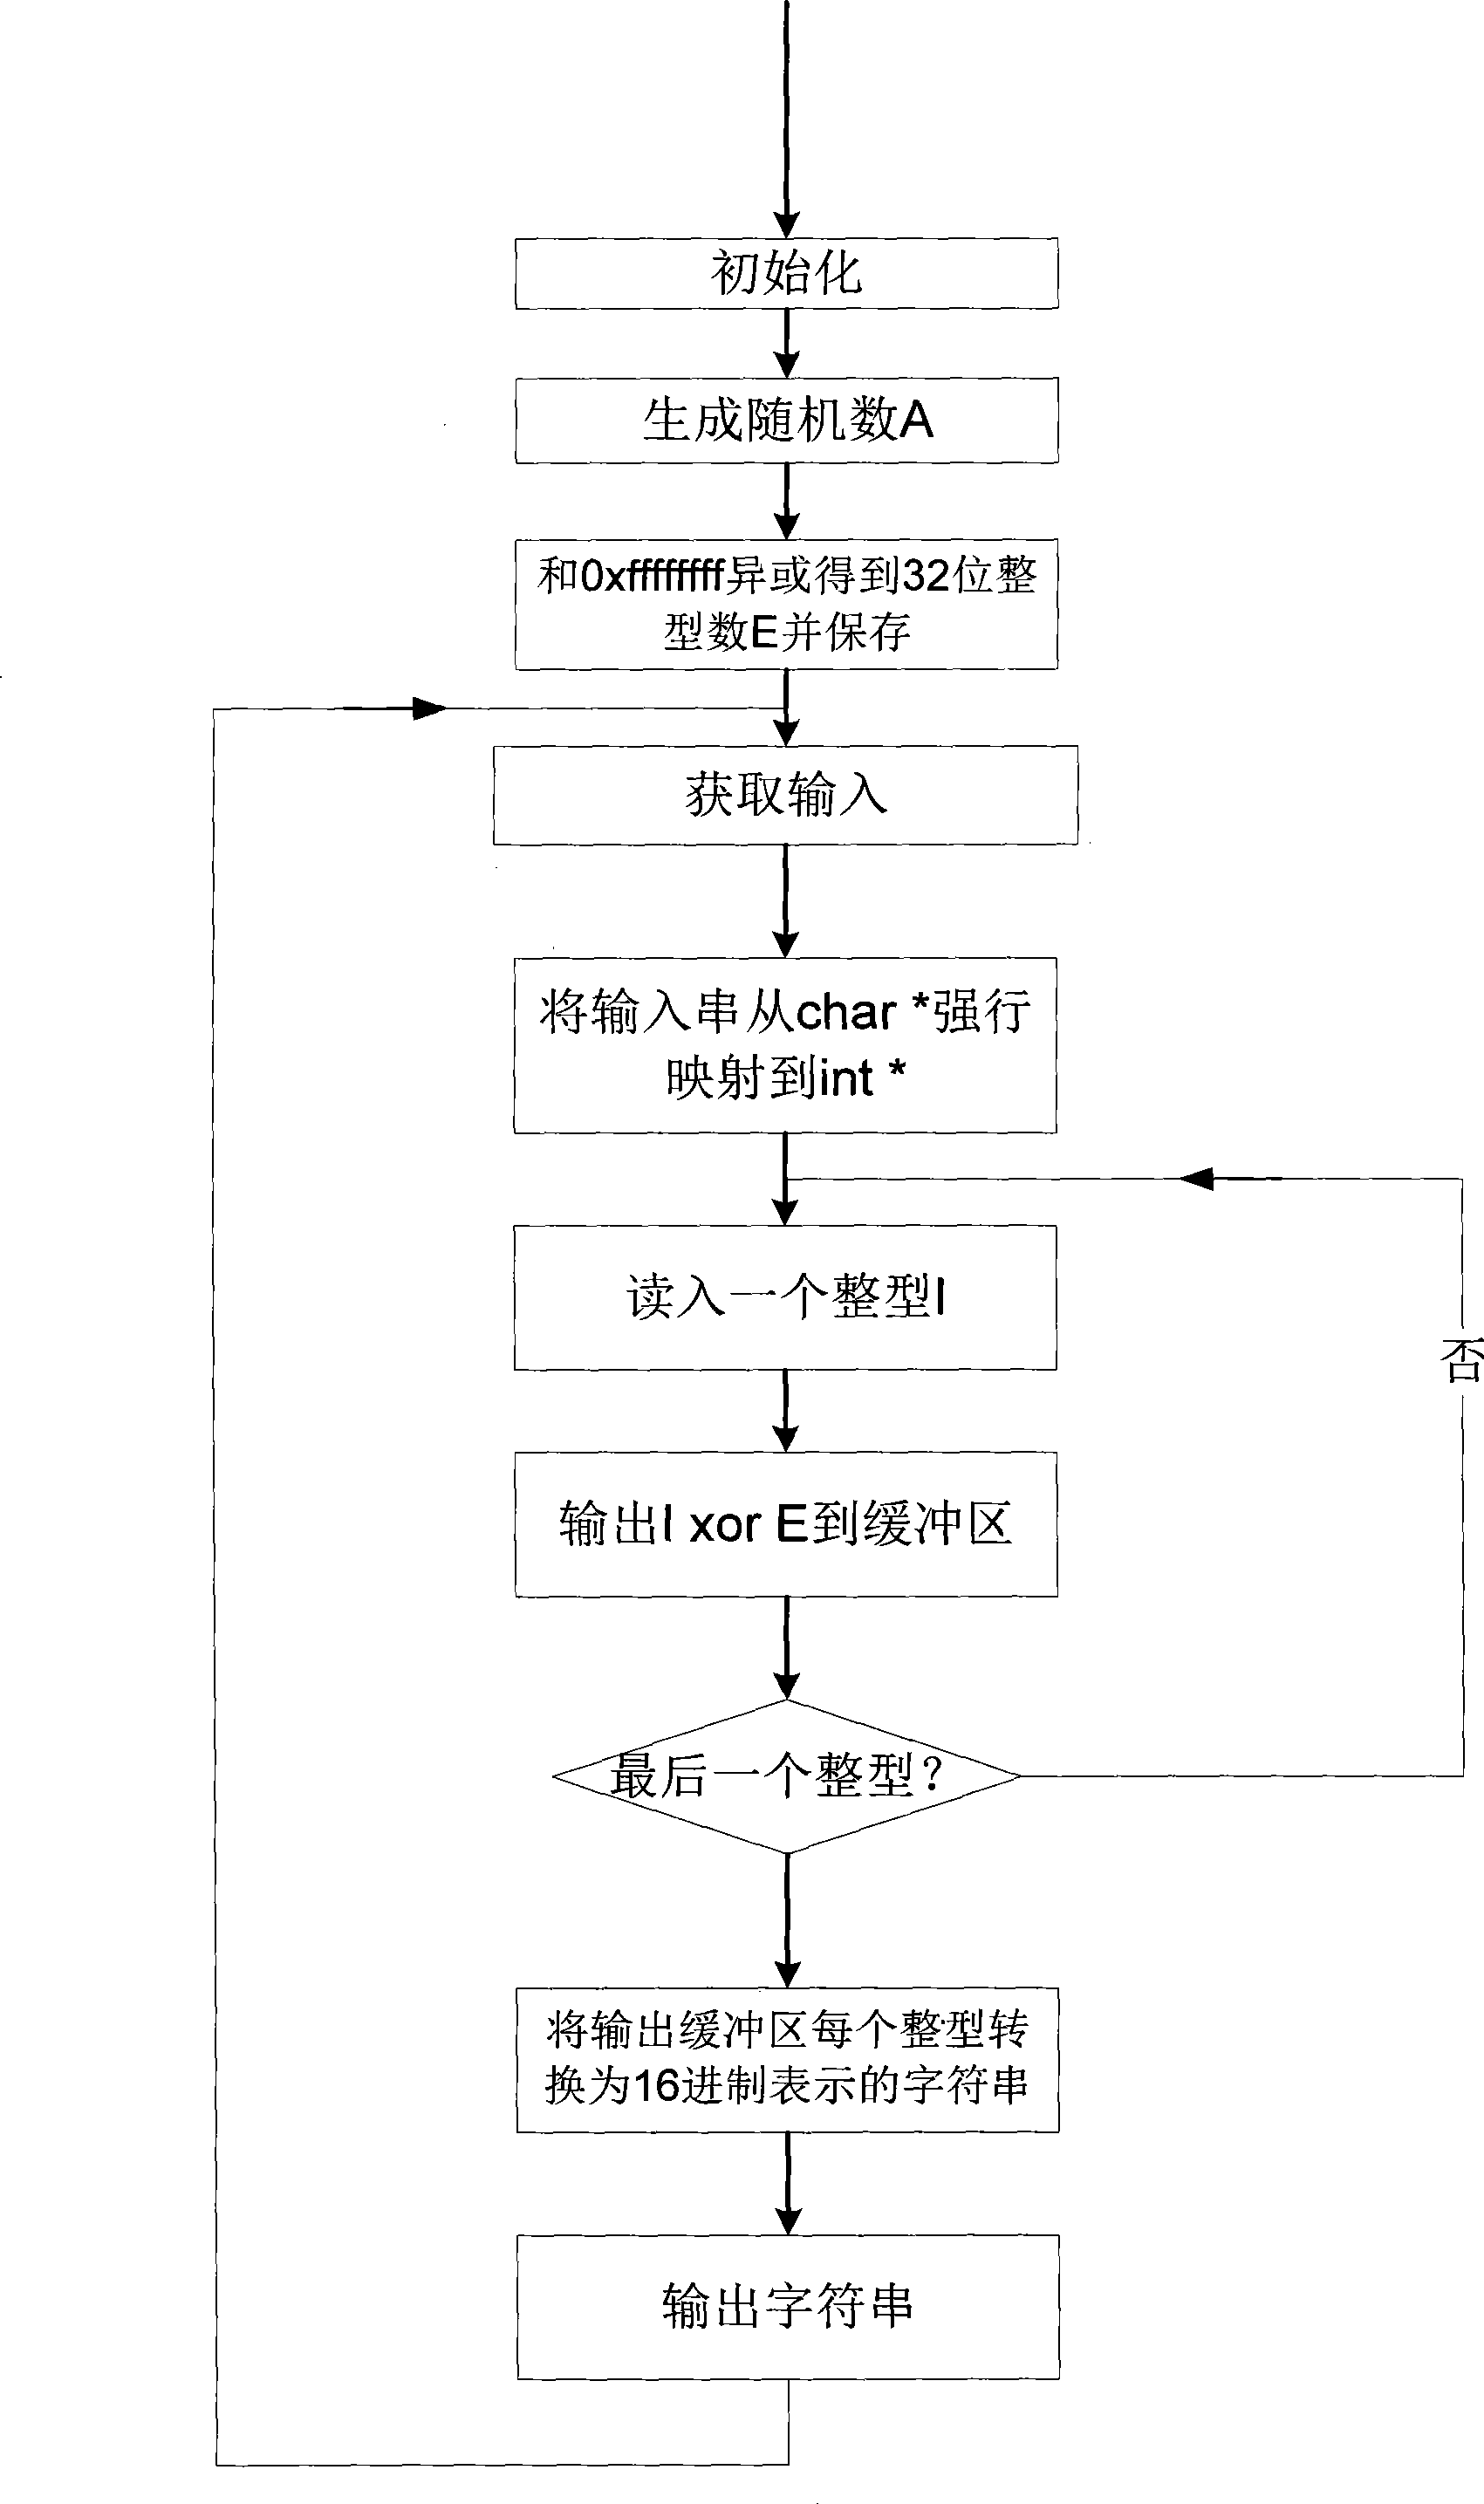 Method and apparatus for binding domain name and specific service